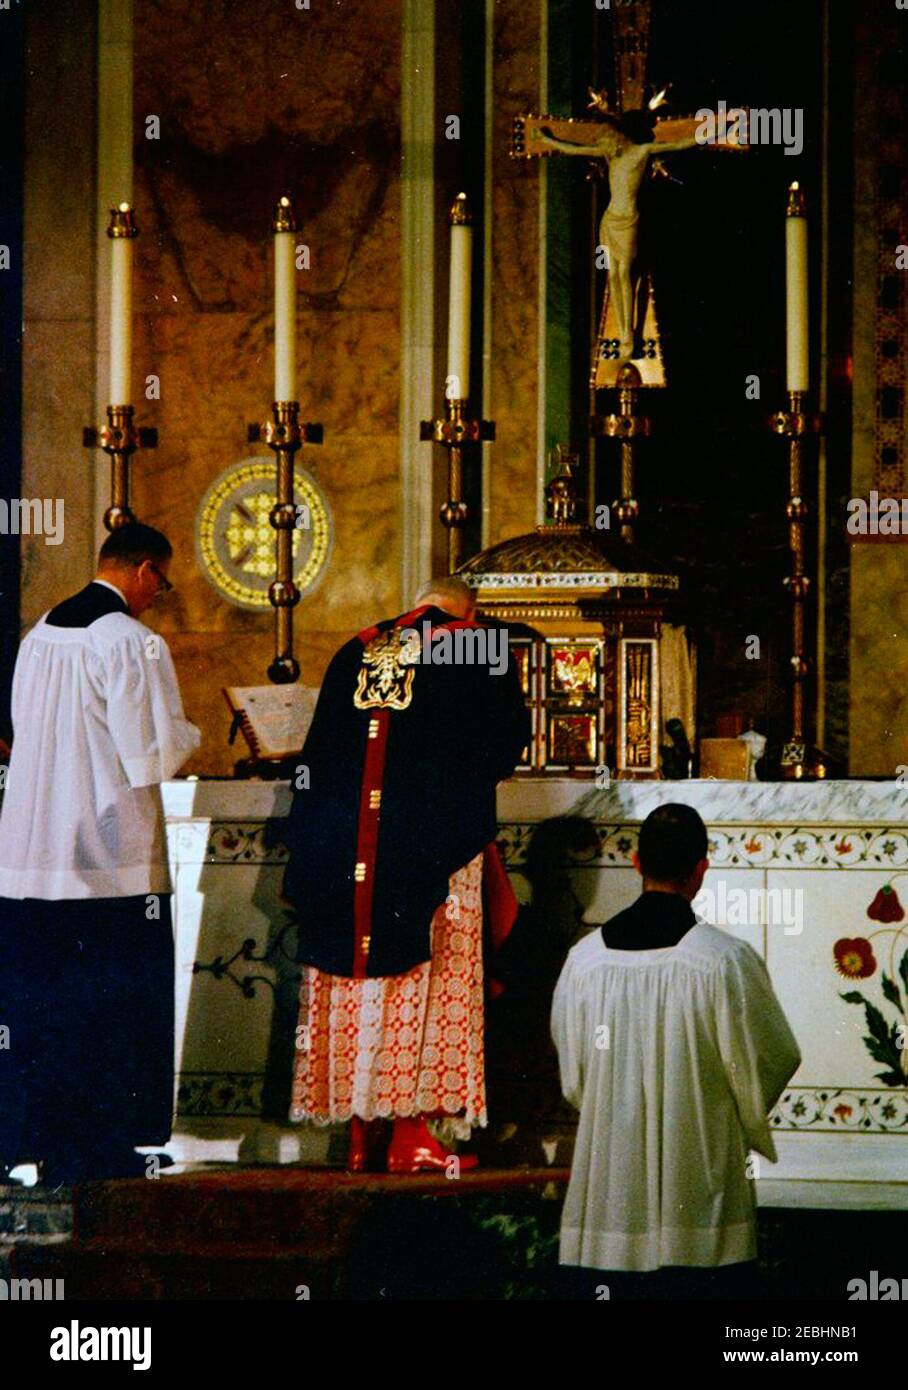 State Funeral of President Kennedy: Requiem Mass at St. Matthewu2019s Cathedral and burial at Arlington National Cemetery. Archbishop of Boston, Massachusetts, Richard Cardinal Cushing (center), presides over the requiem mass in the state funeral of President John F. Kennedy. Cathedral of St. Matthew the Apostle, Washington, D.C. Stock Photo